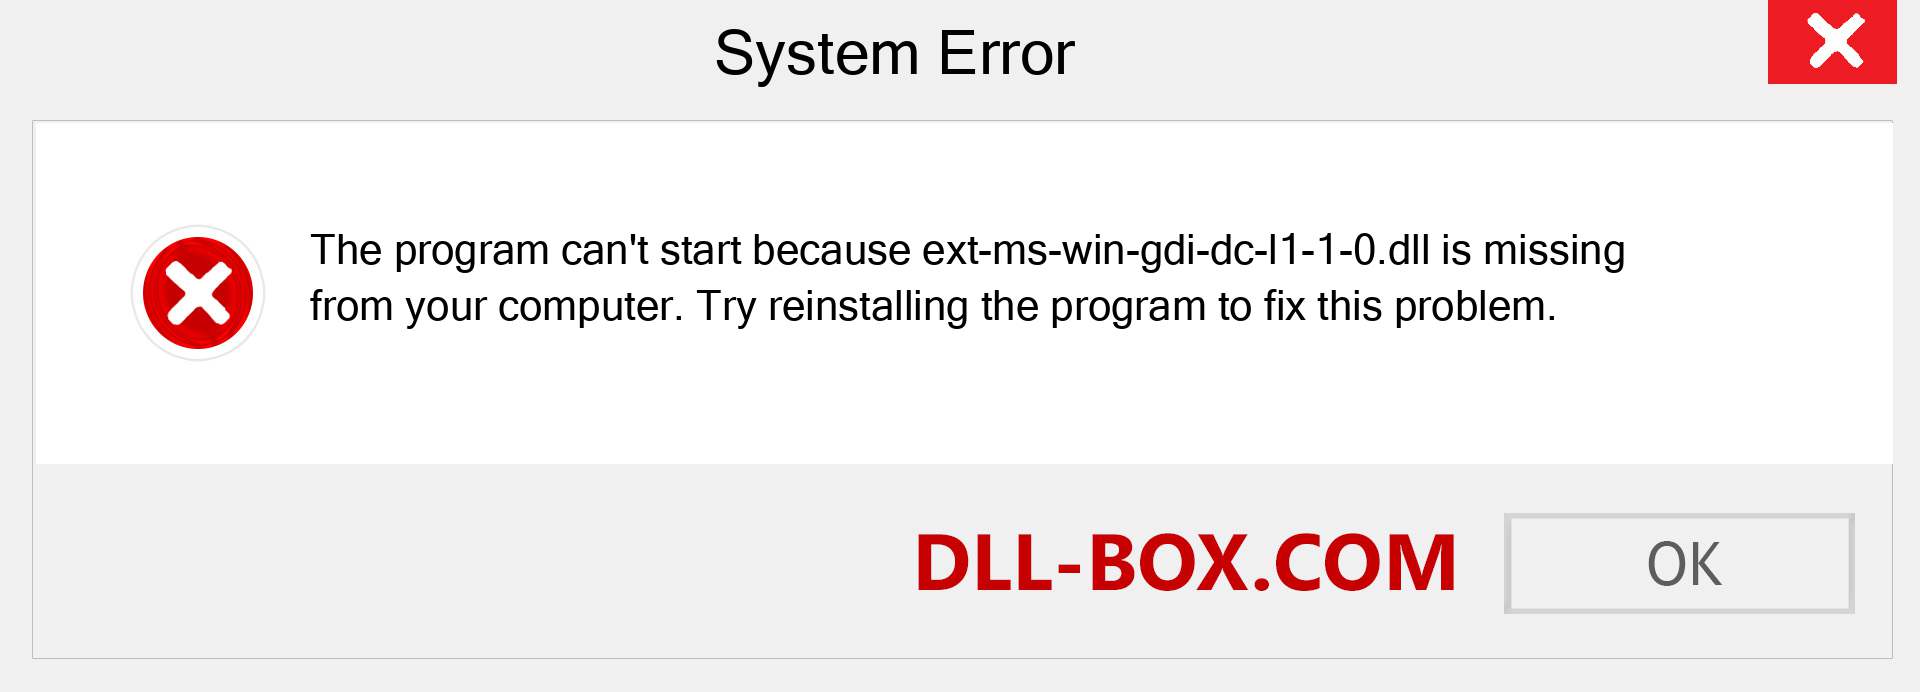  ext-ms-win-gdi-dc-l1-1-0.dll file is missing?. Download for Windows 7, 8, 10 - Fix  ext-ms-win-gdi-dc-l1-1-0 dll Missing Error on Windows, photos, images